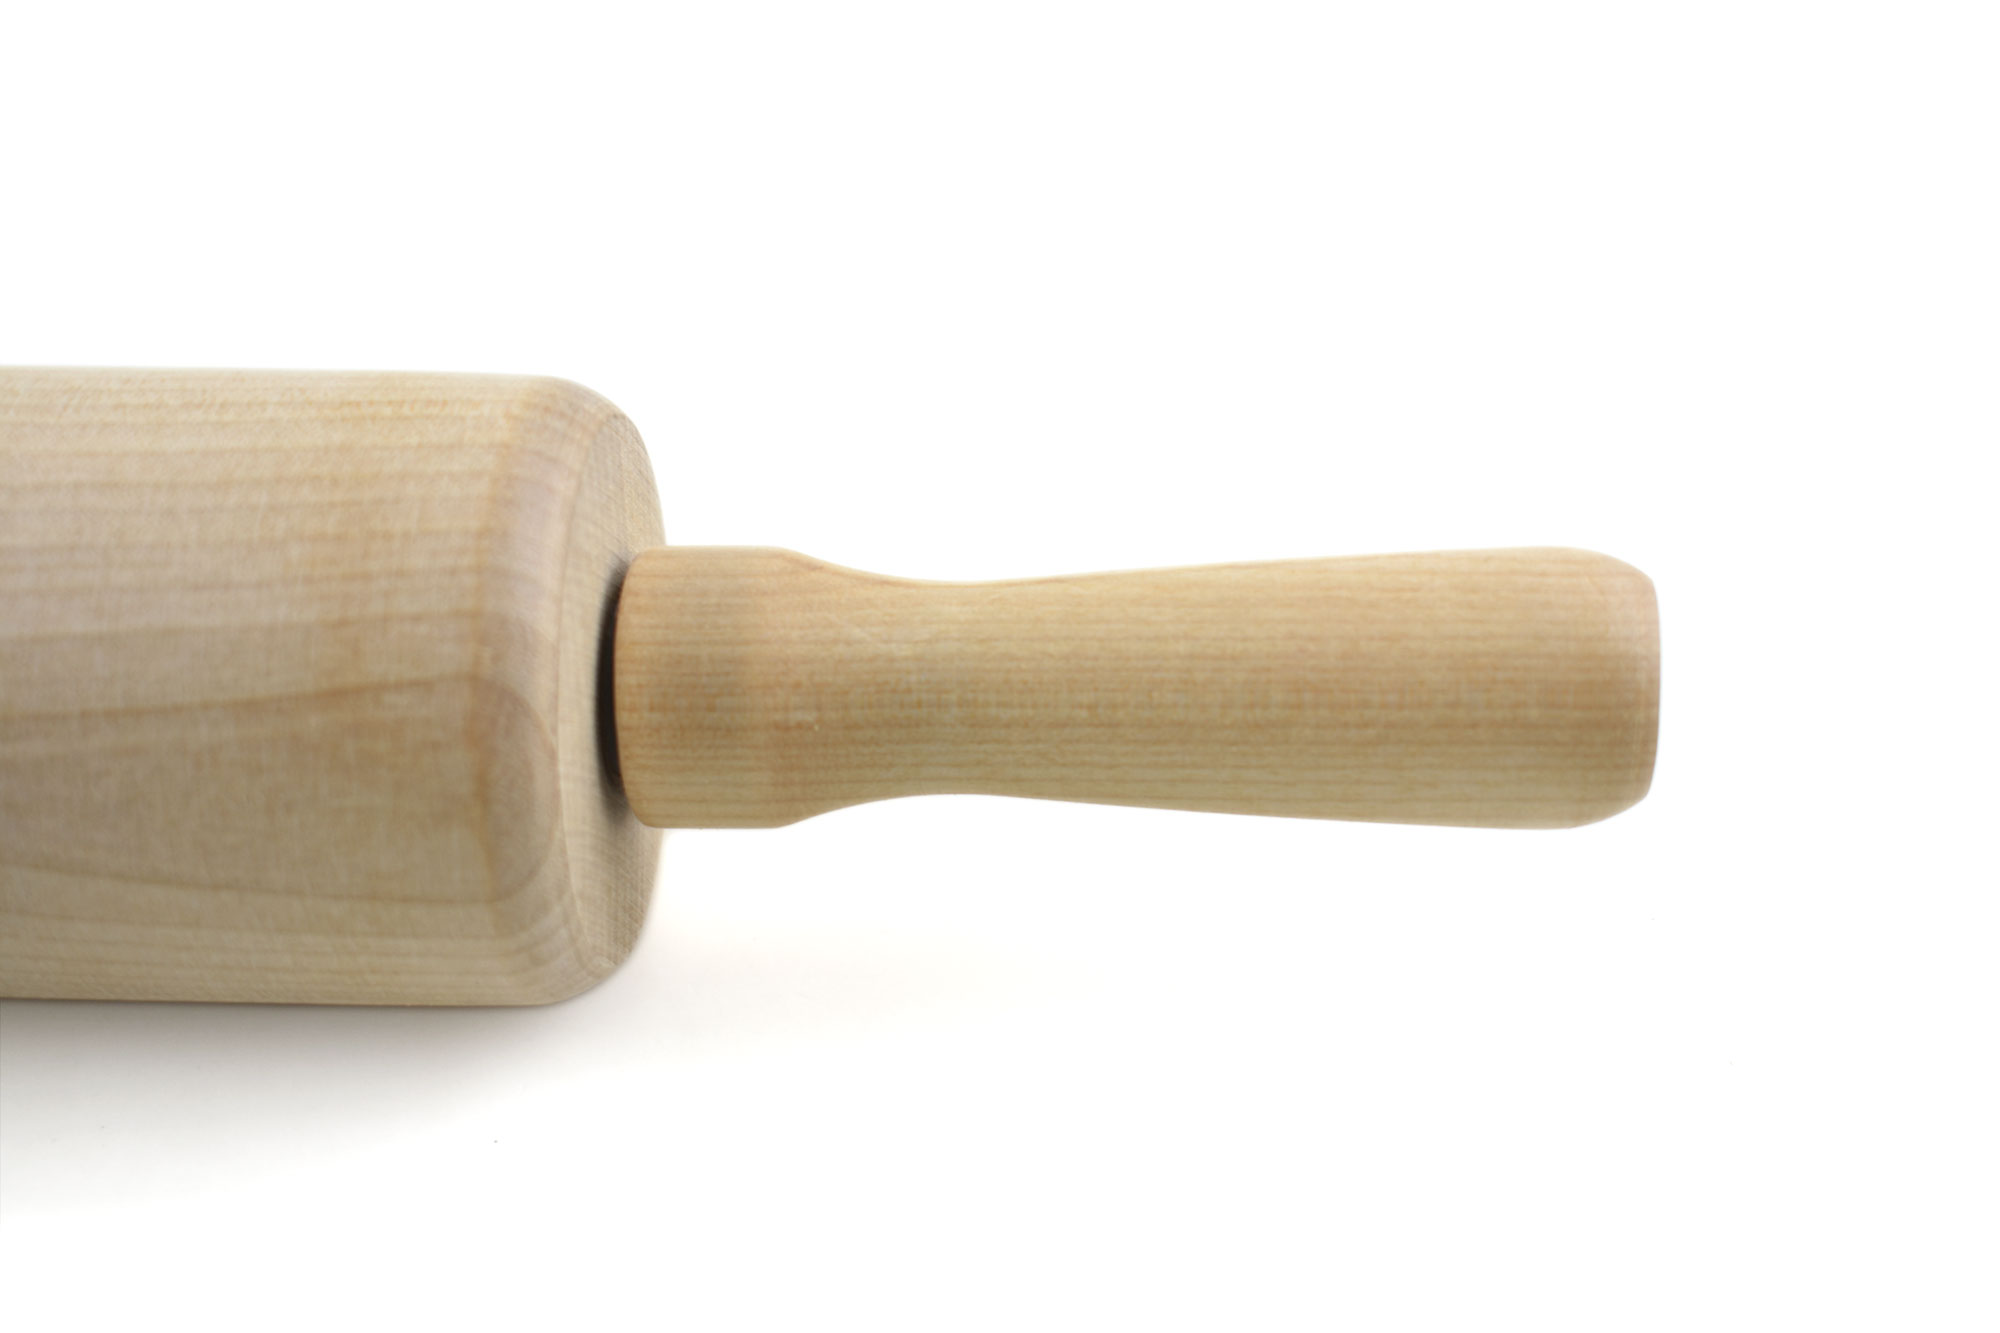 Rolling Pin with Handles